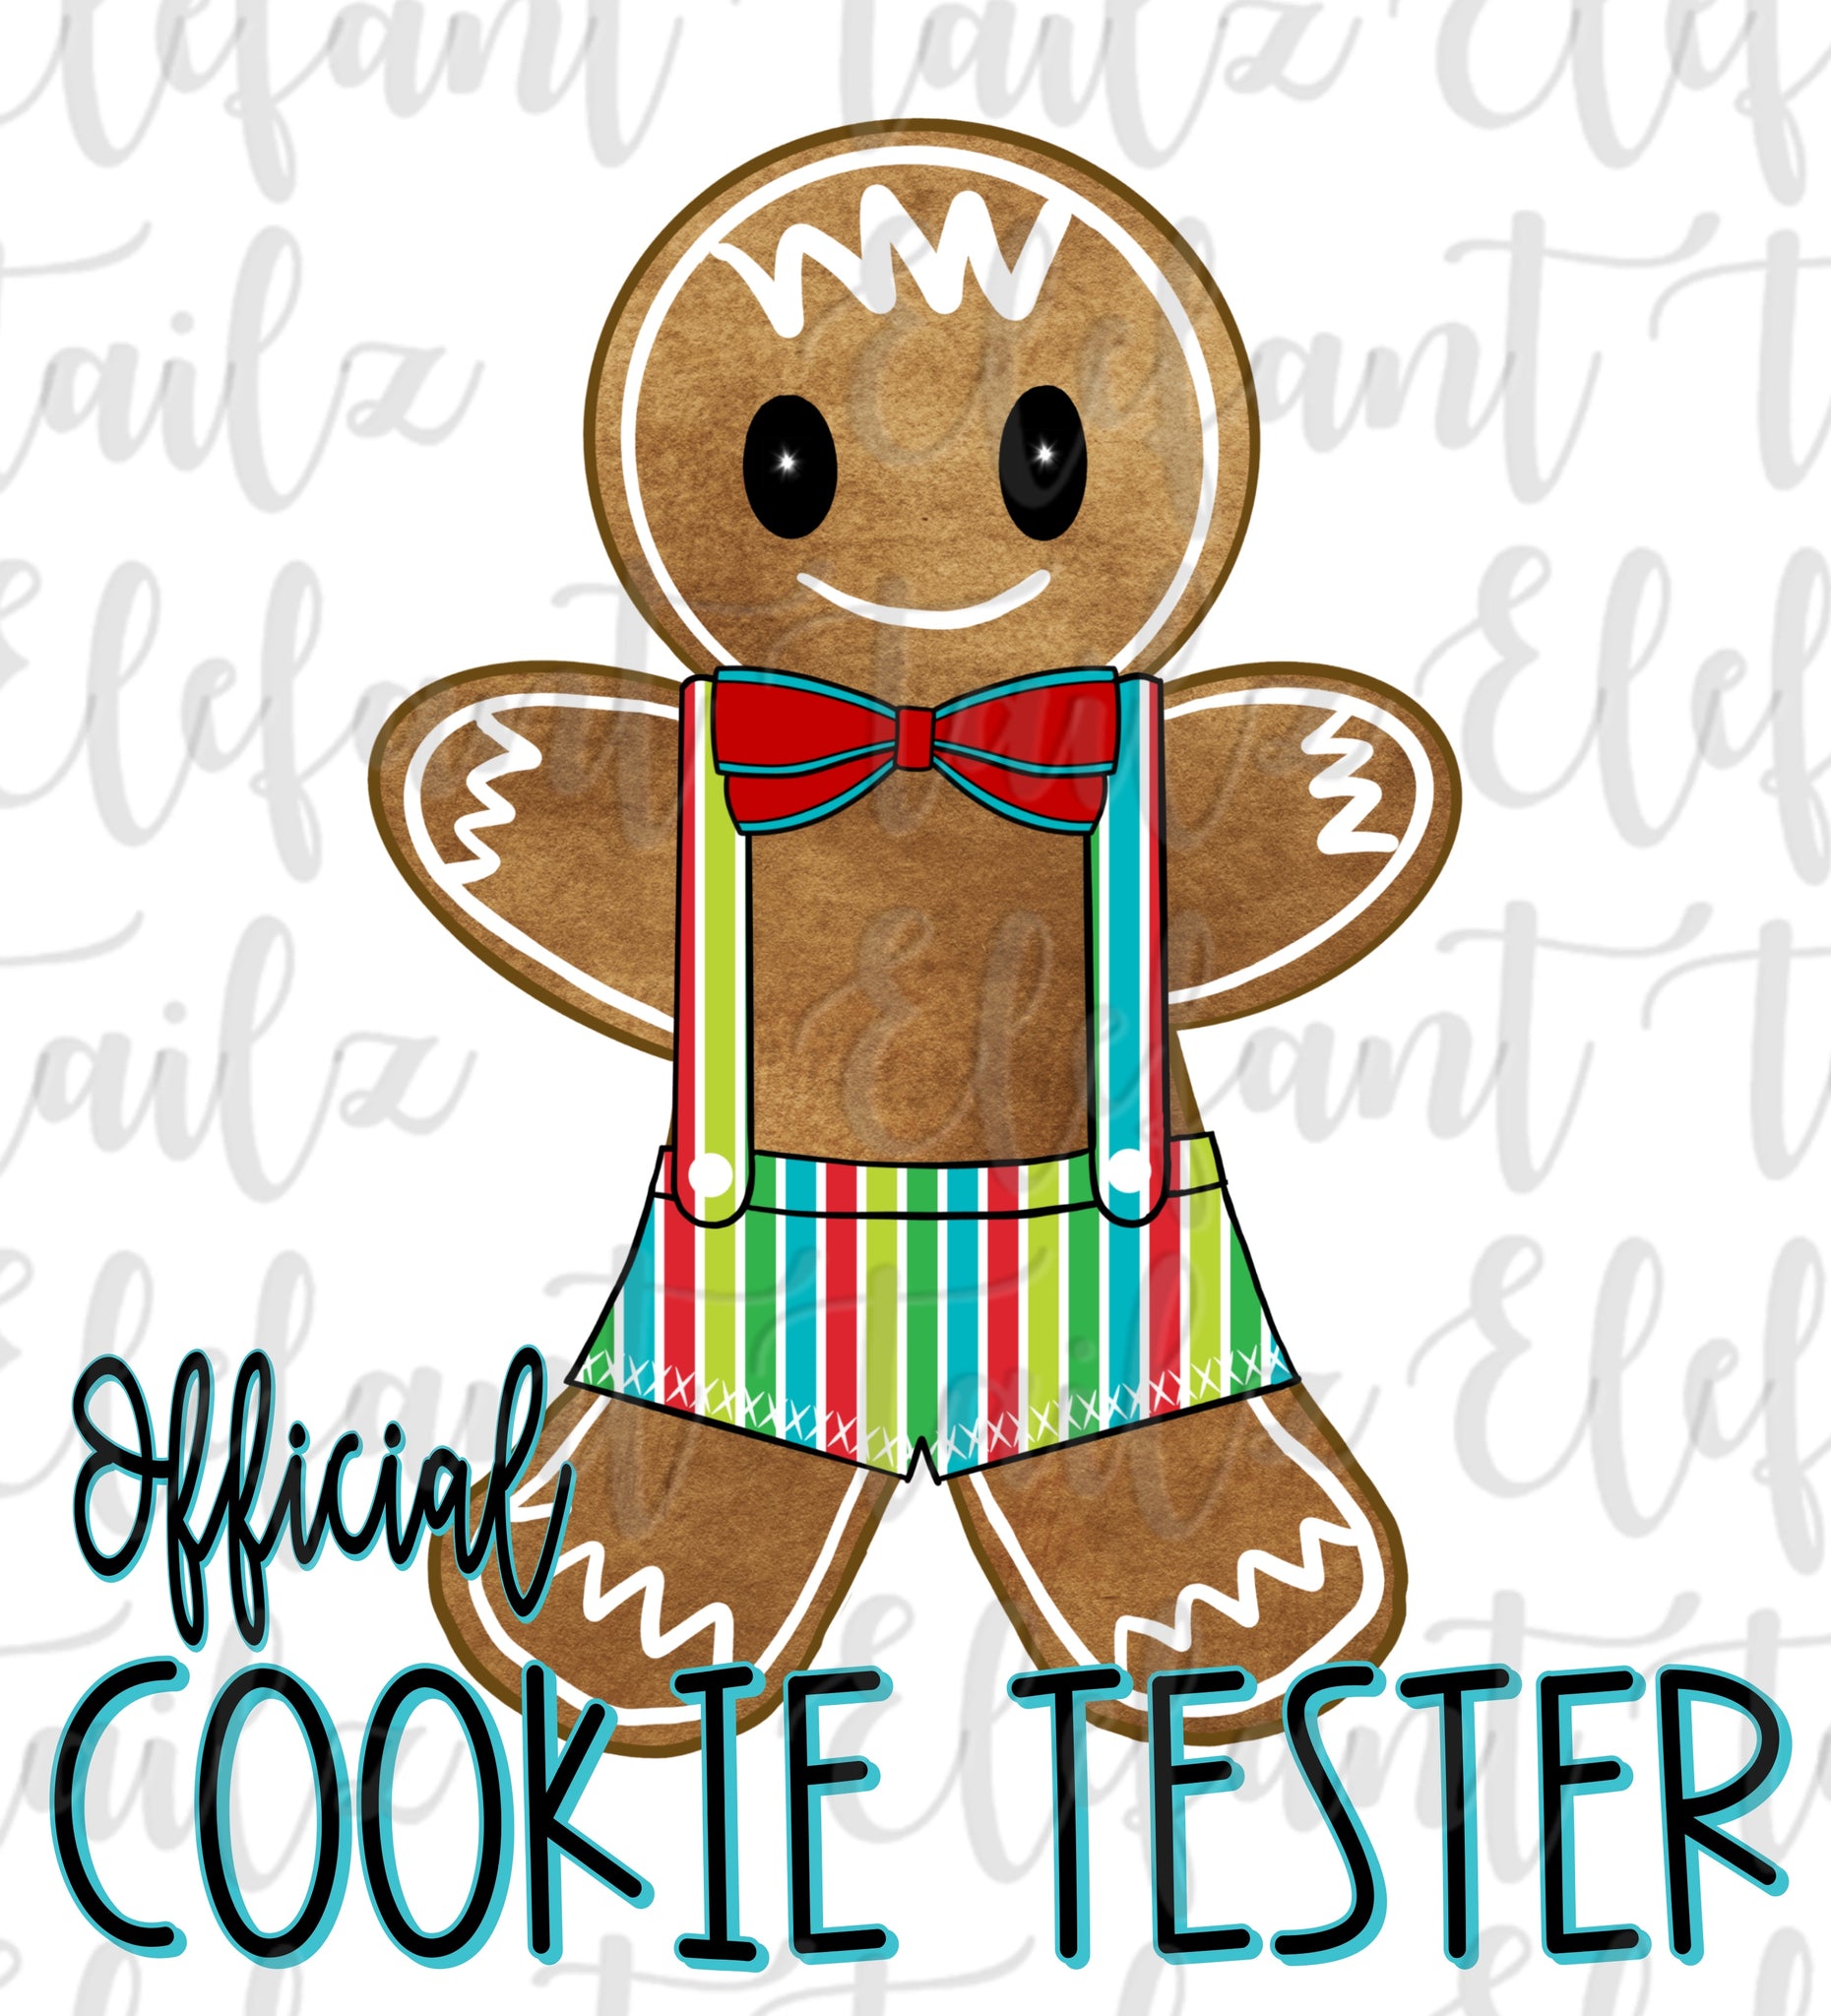 Official Cookie Tester Boy